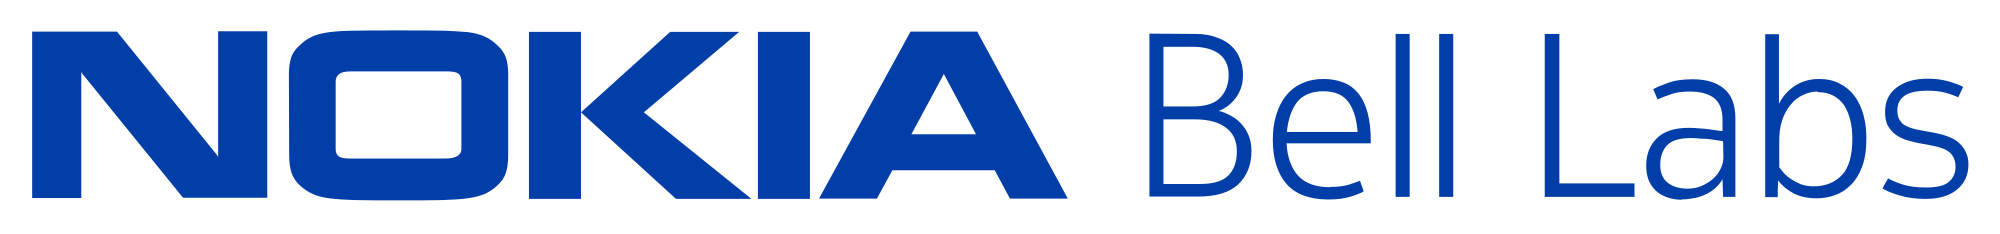 Nokia_Bell_Labs_logo.svg.png 